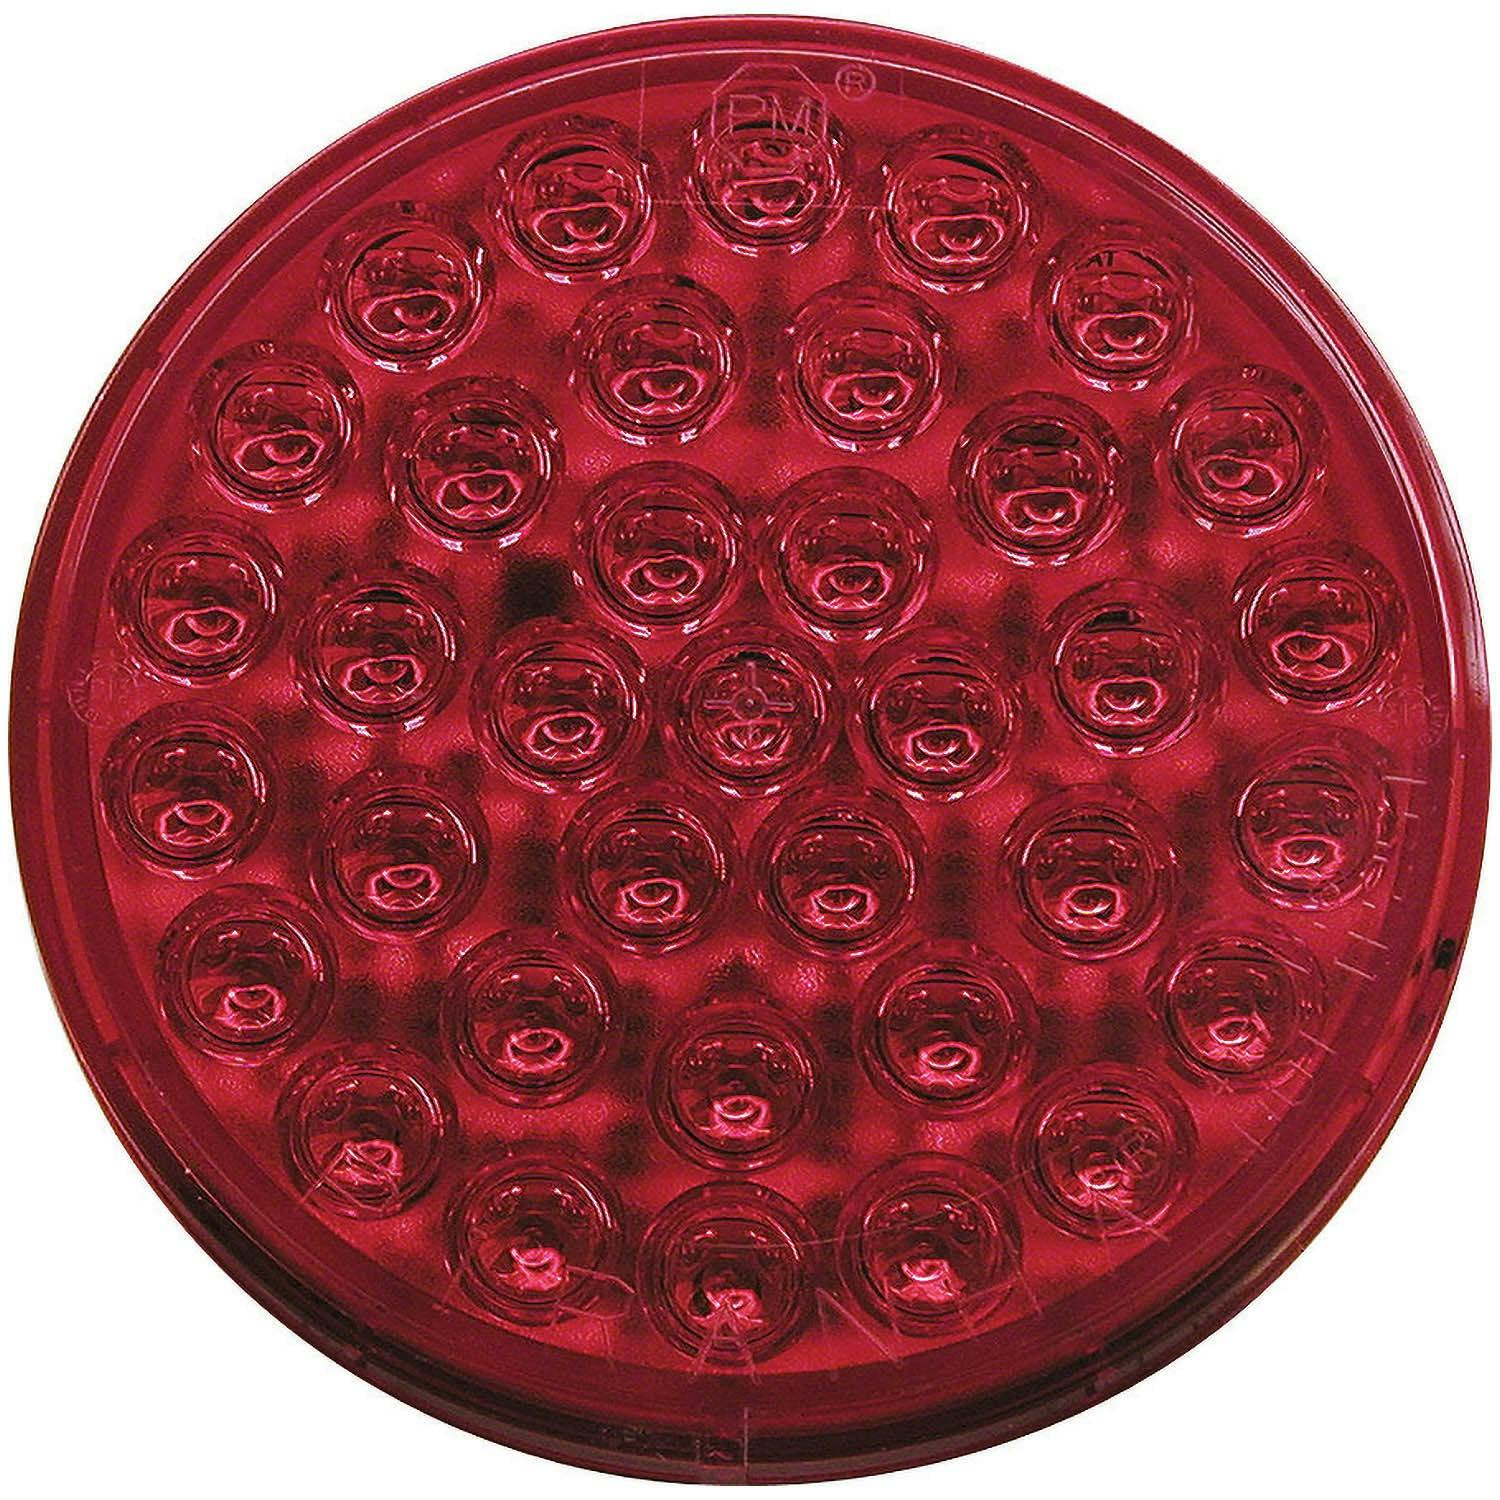 LED Stop/Turn/Tail, Round, 36 Diode AMP Housing Grommet-Mount 4", red (Pack of 6)